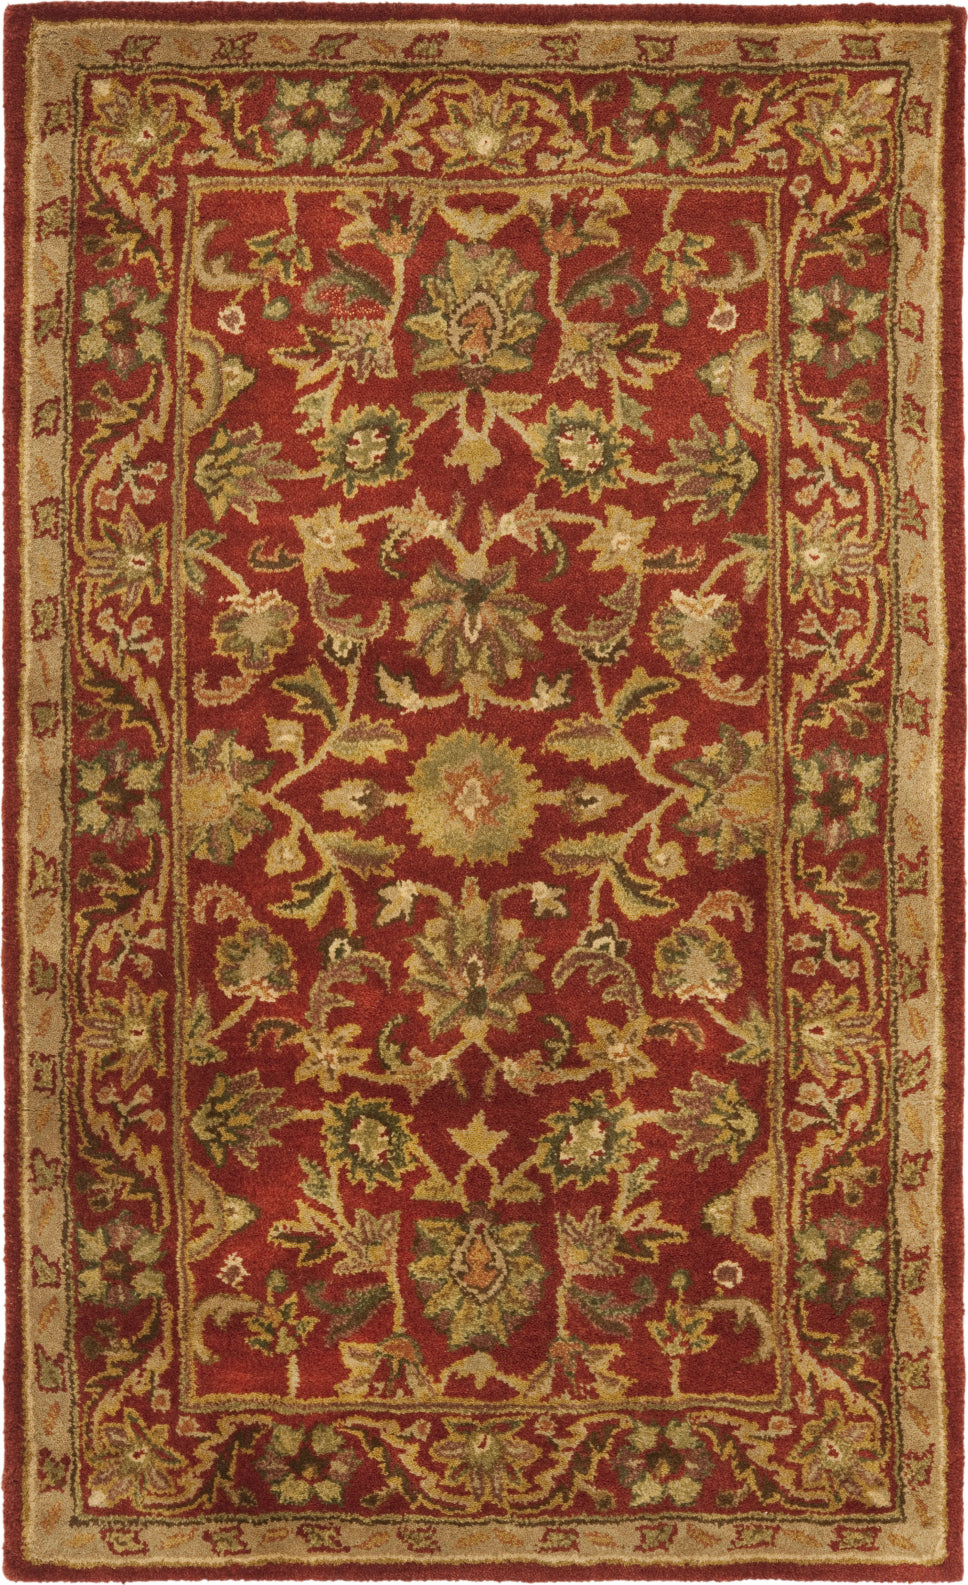 Safavieh Antiquity At52 Red/Red Area Rug main image